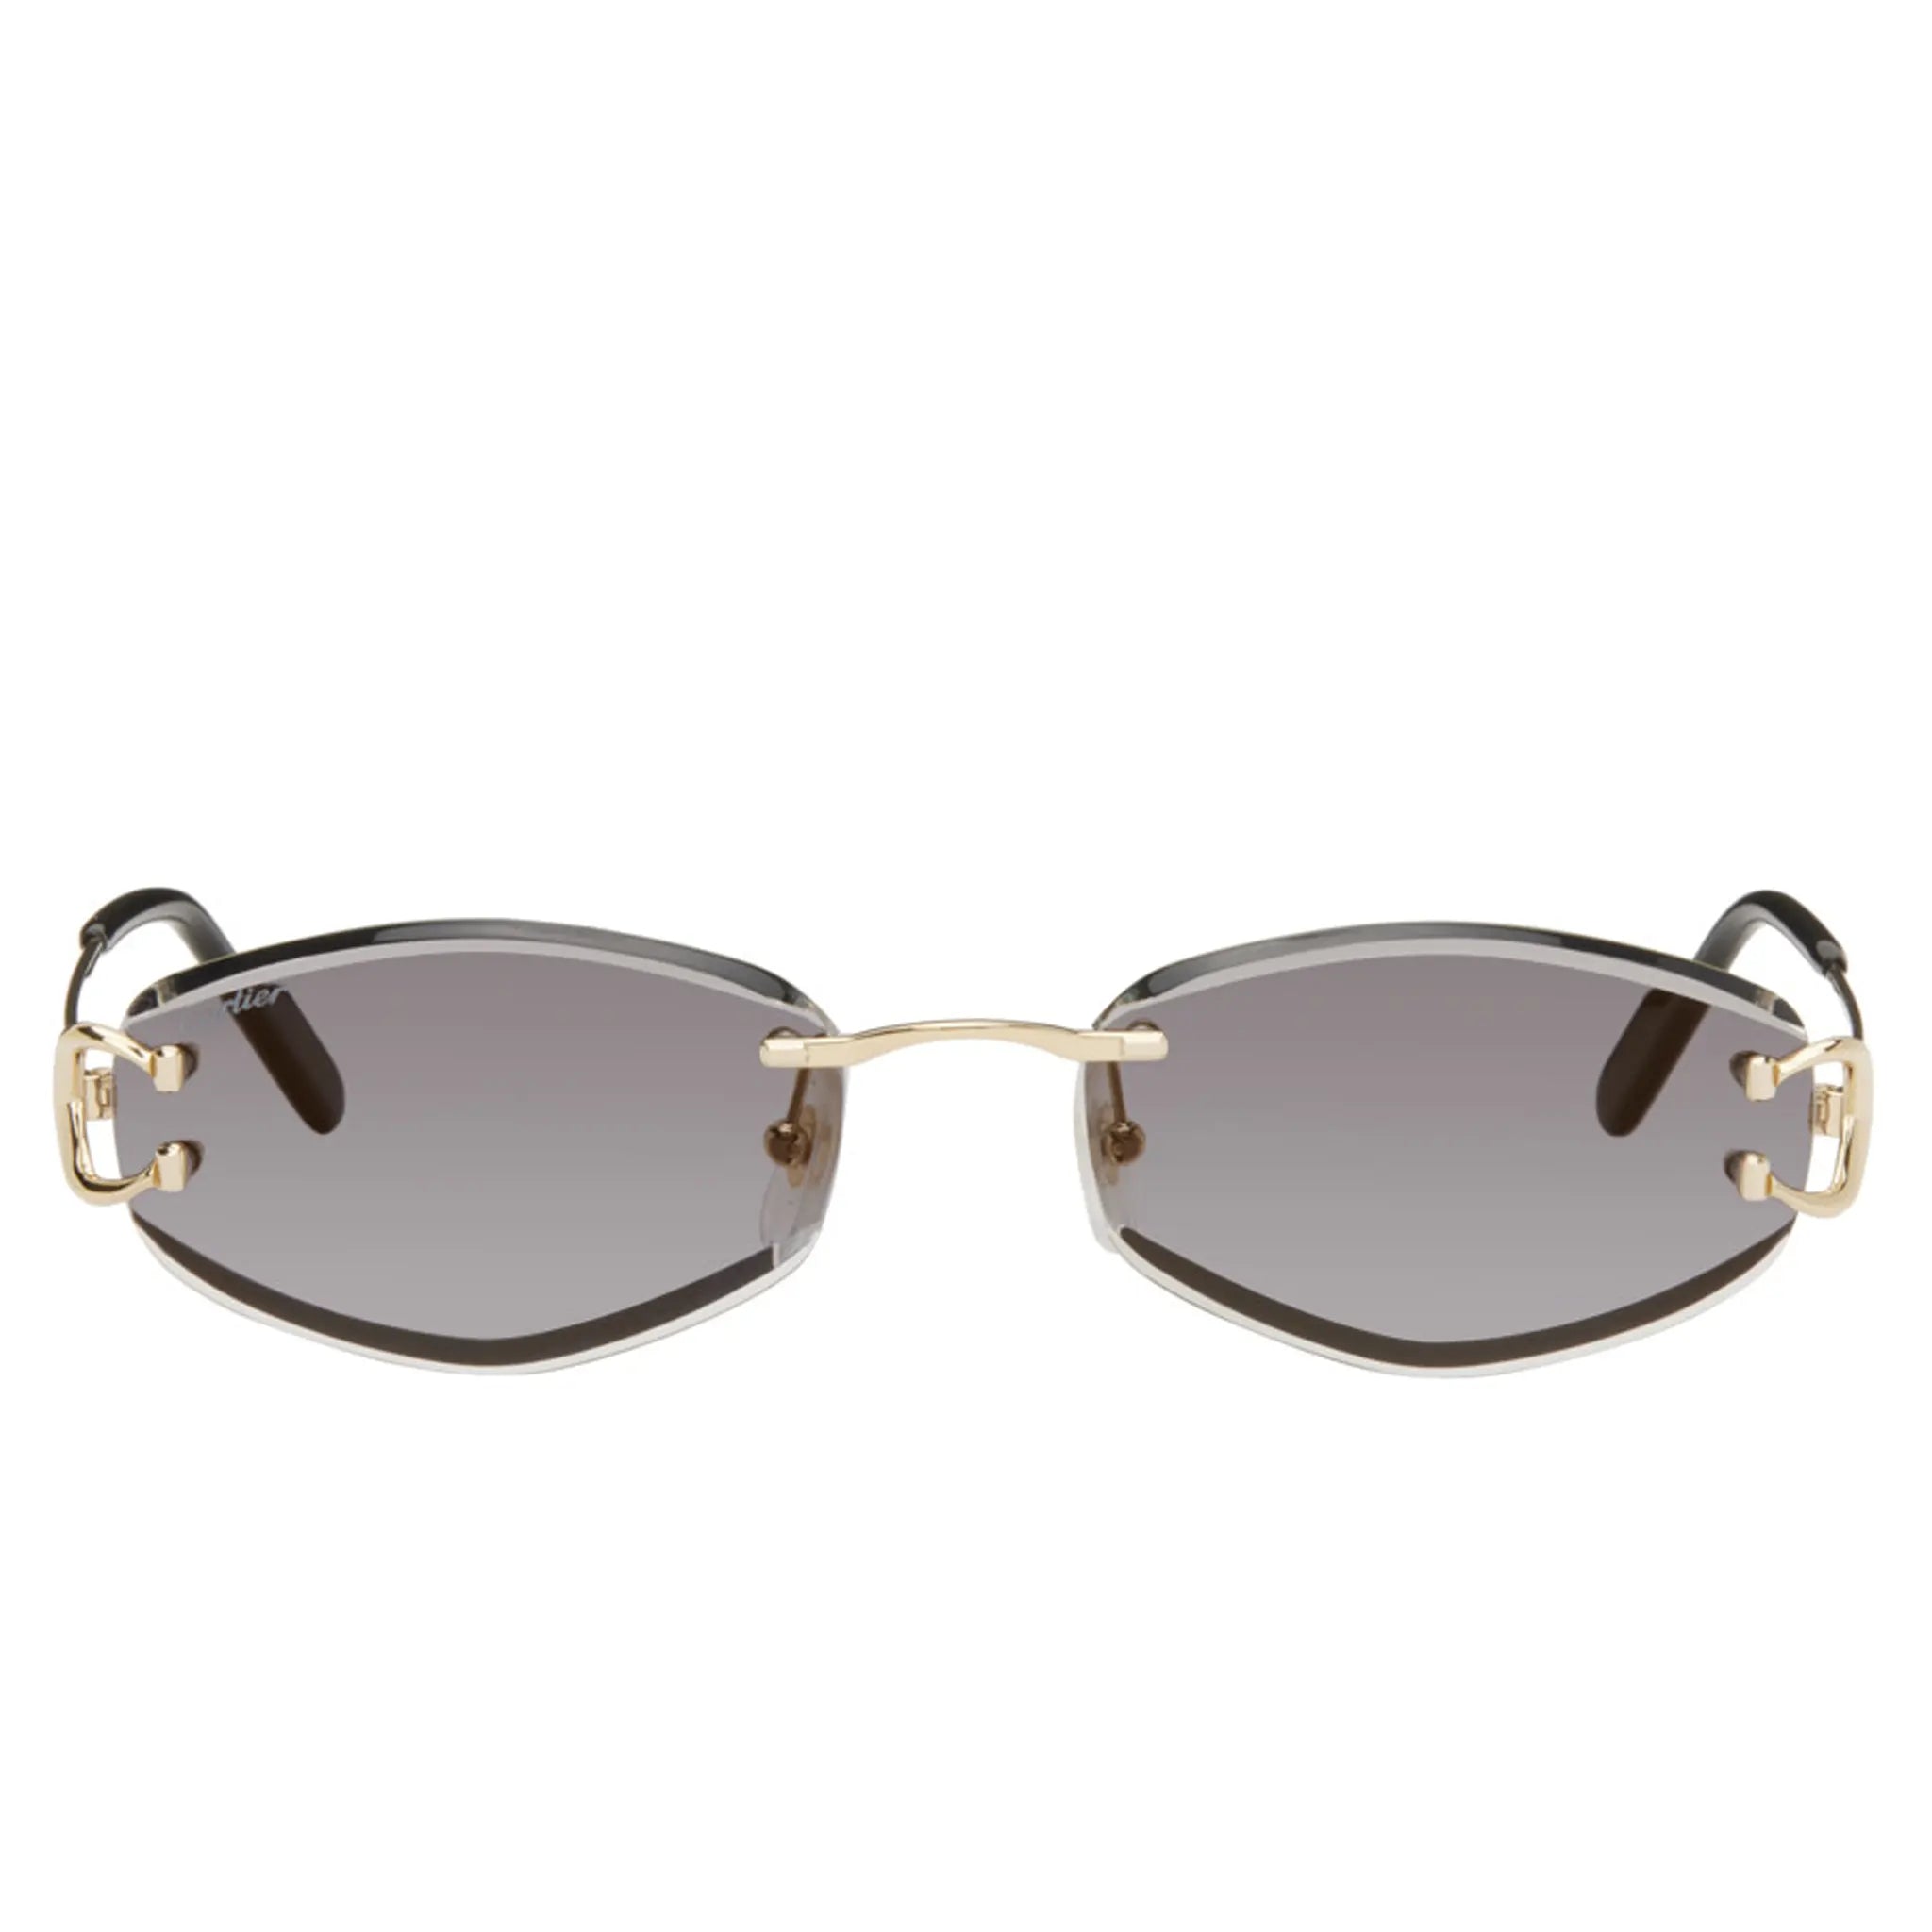 Front view of Cartier Eyewear CT0467S-001 Gold Grey Sunglasses